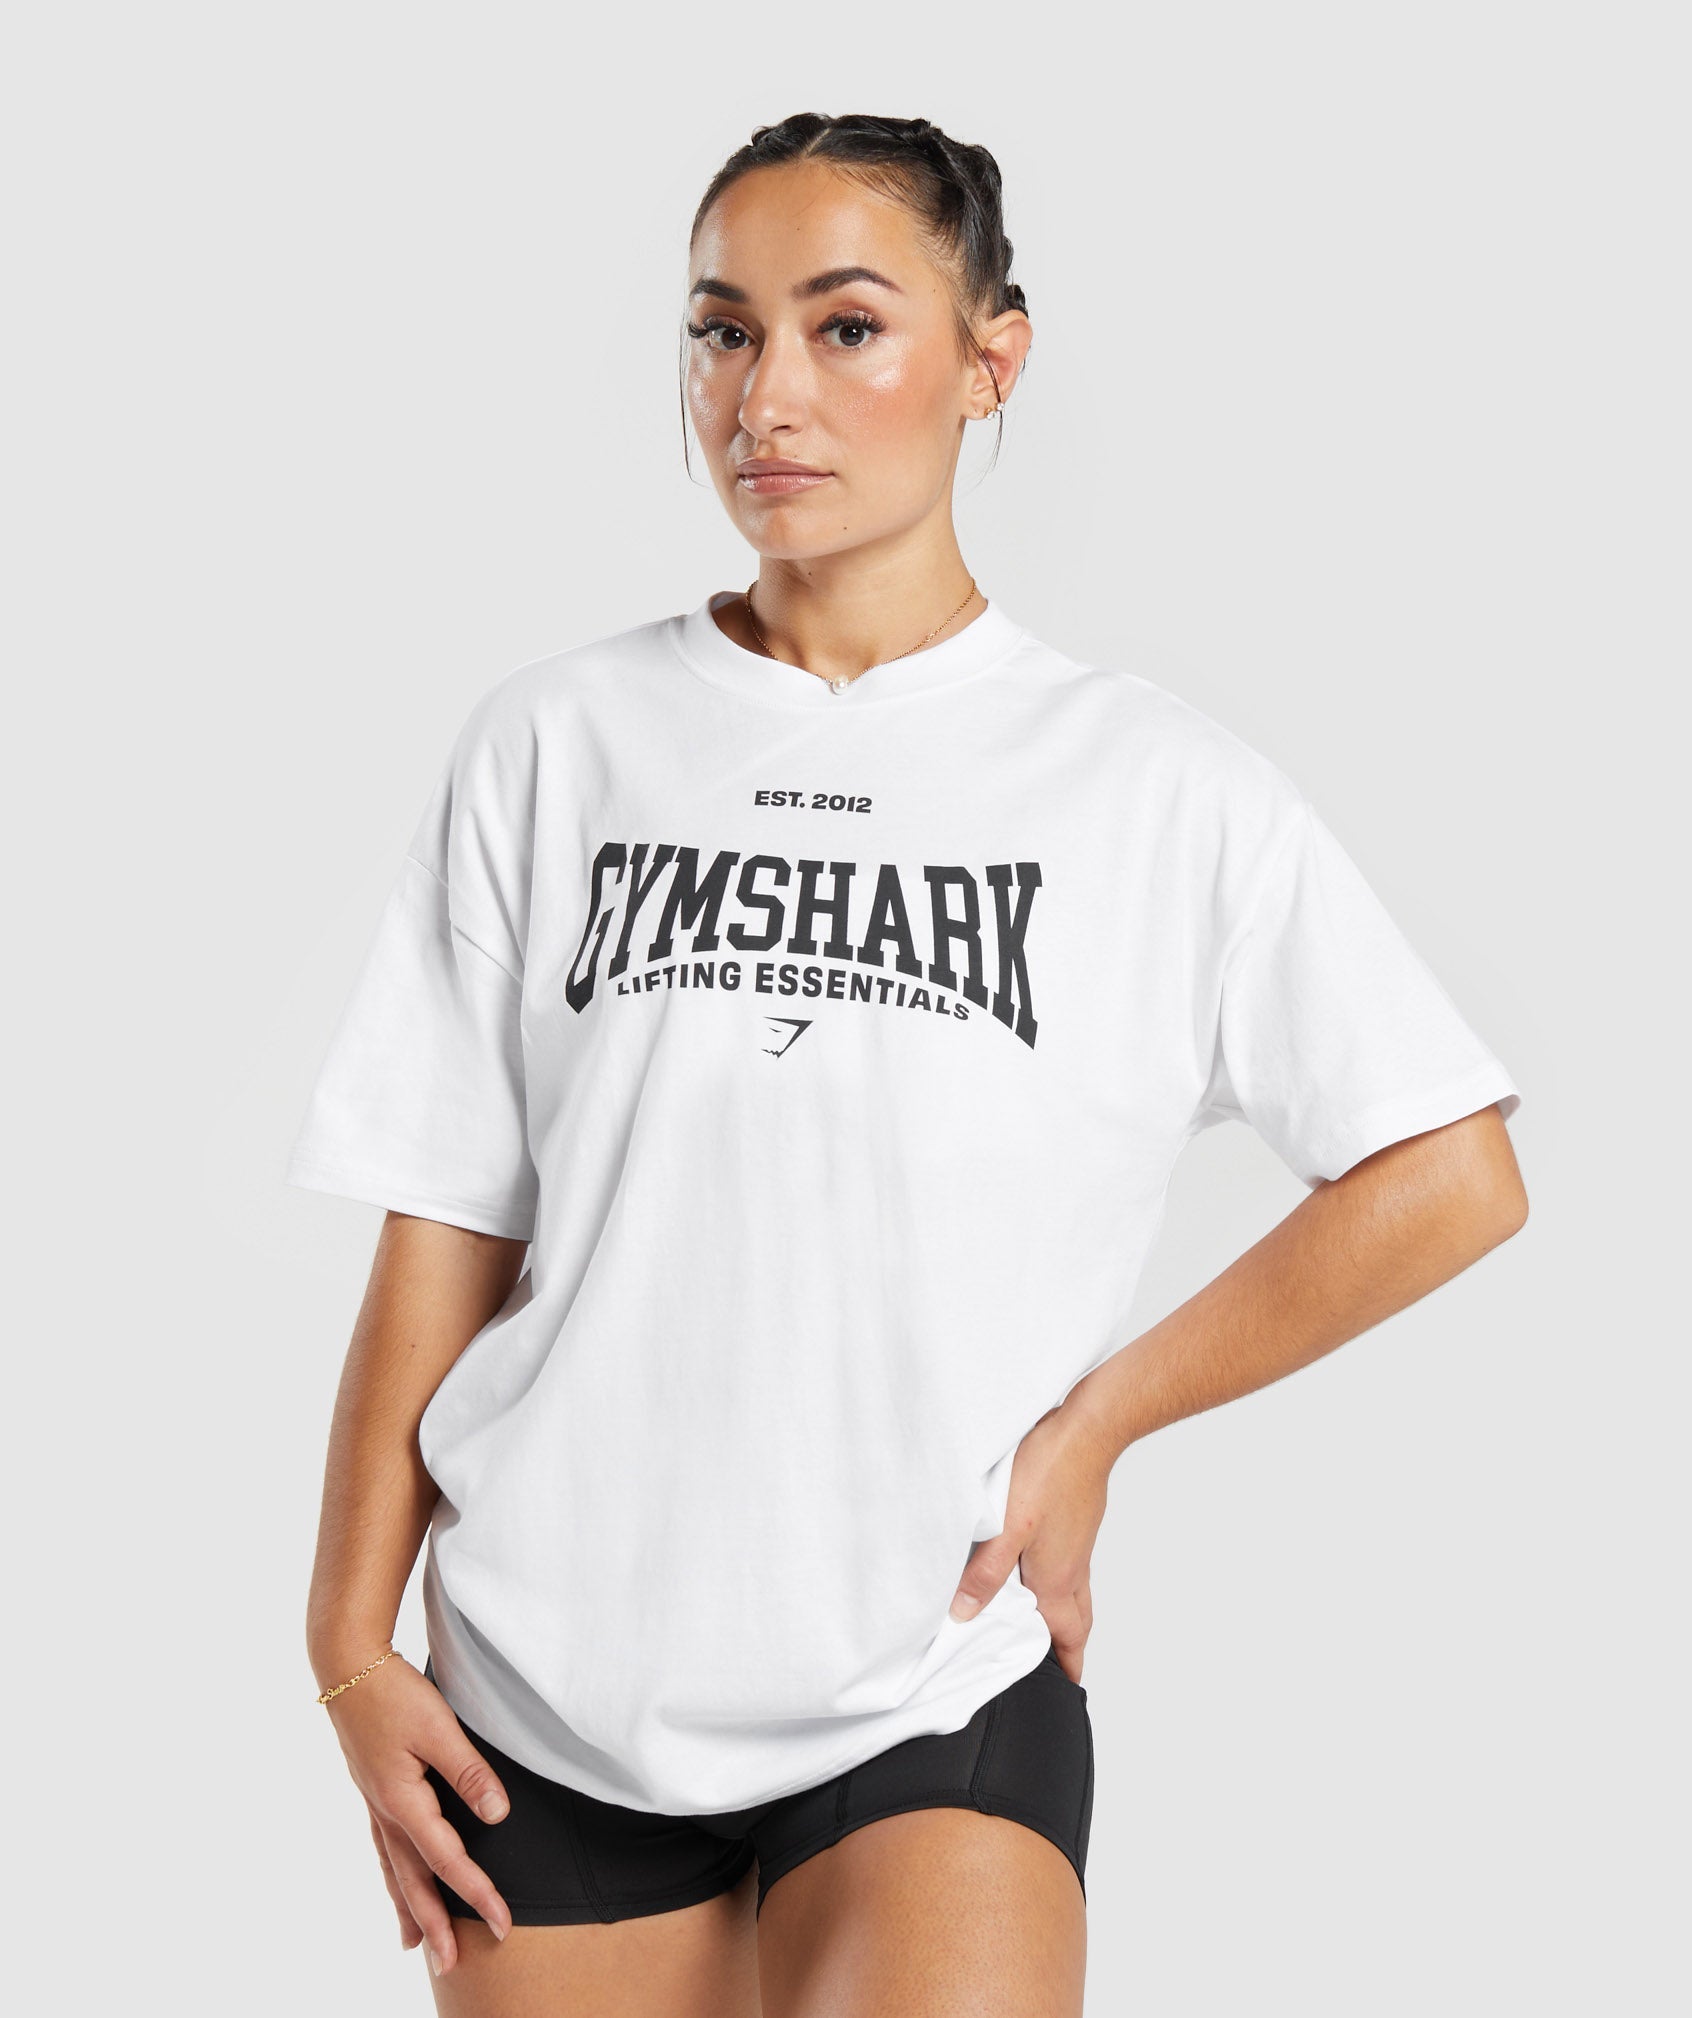 Lifting Essentials Oversized T-shirt in White is out of stock